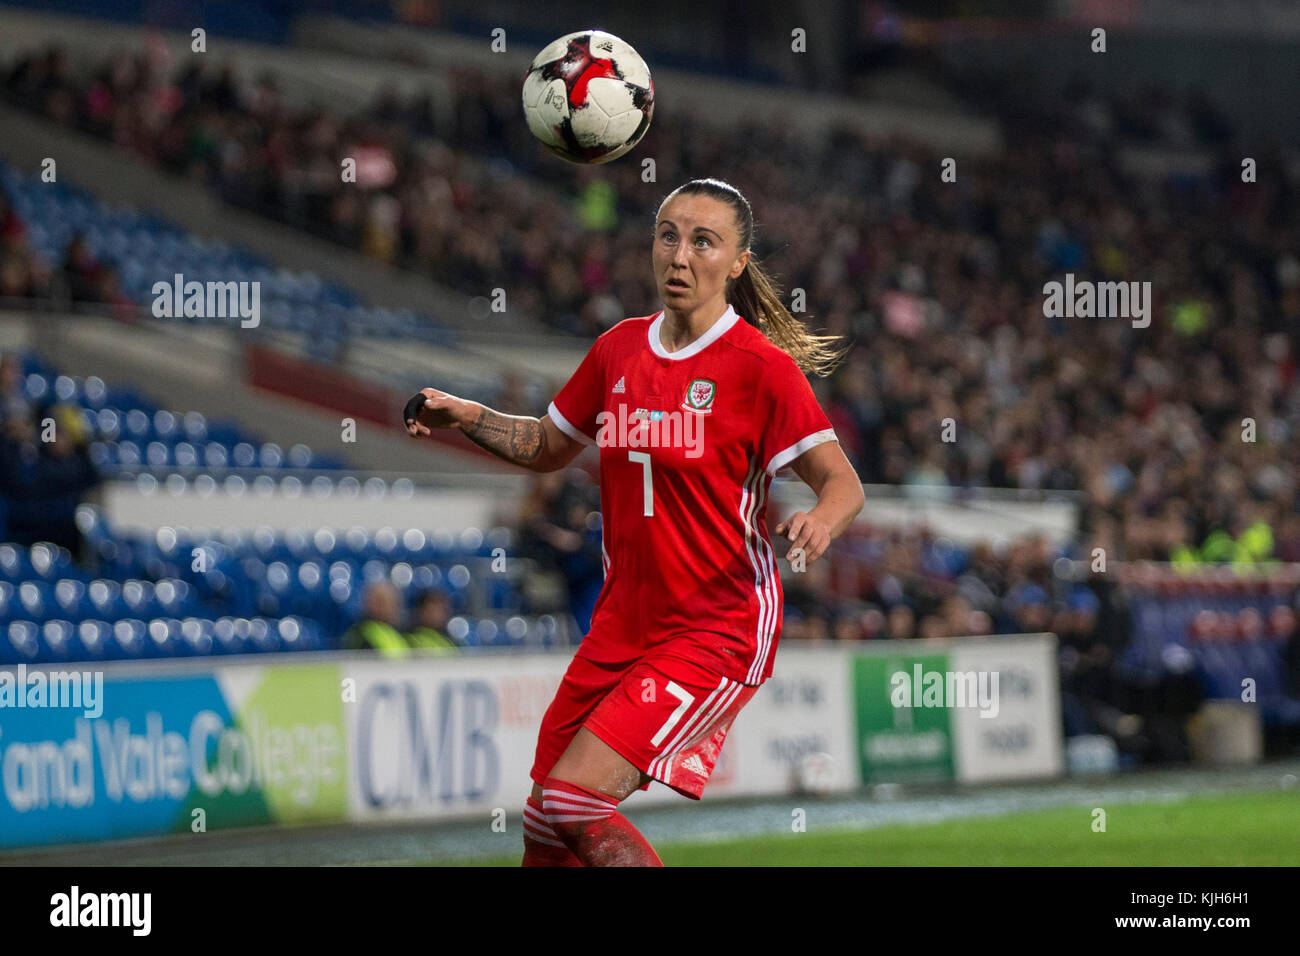 Cardiff, Wales, UK, November 24th 2017. Natasha Harding of Wales during the FIFA Women's World Cup qualification match between Wales and Kazakhstan at Cardiff City Stadium. Credit: Mark Hawkins/Alamy Live News Stock Photo